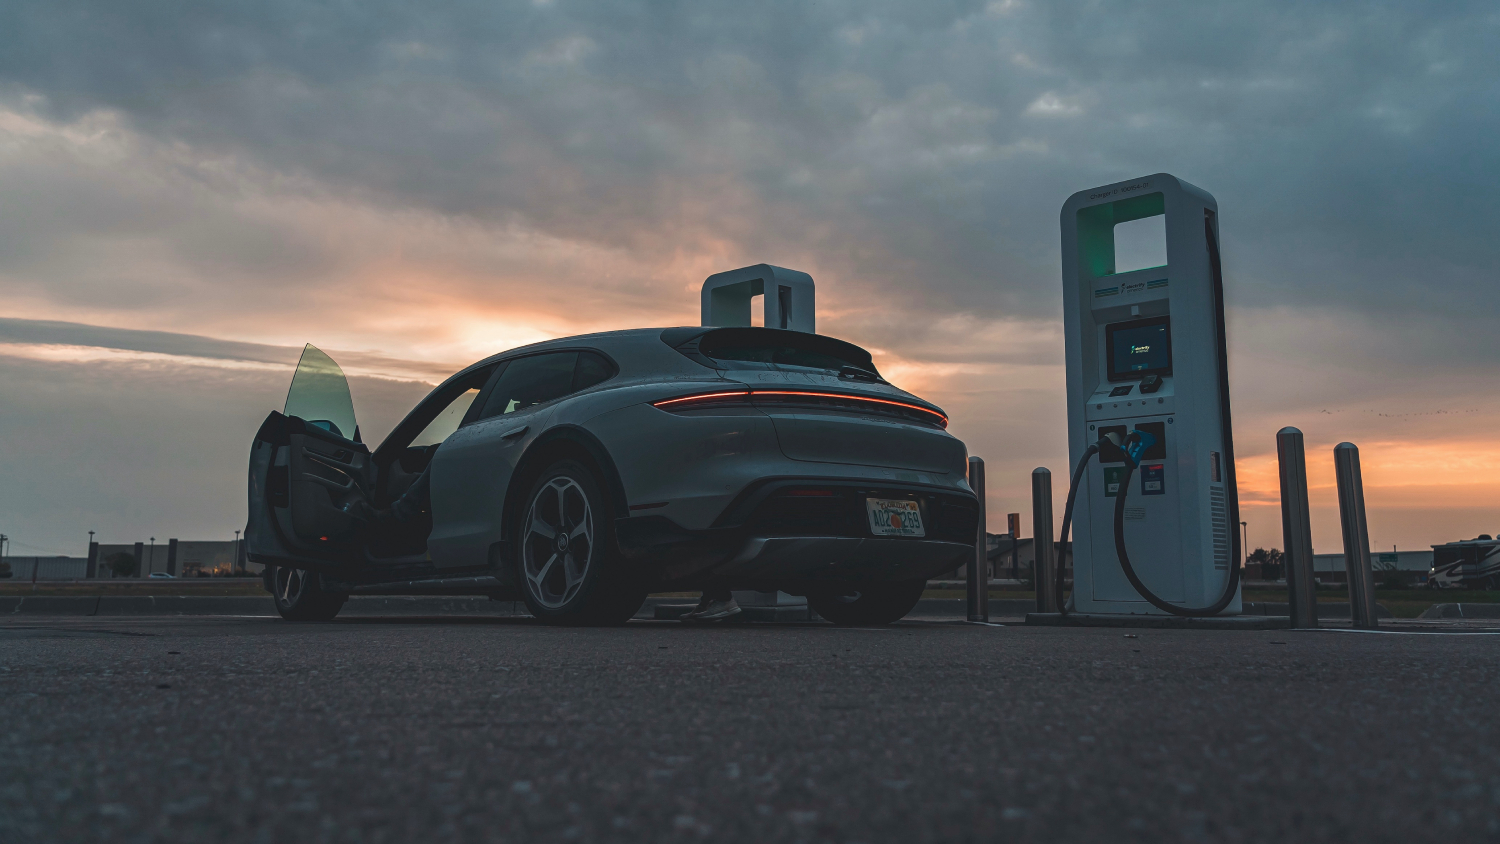 The Porsche Taycan electric vehicle went on a cross-country adventure